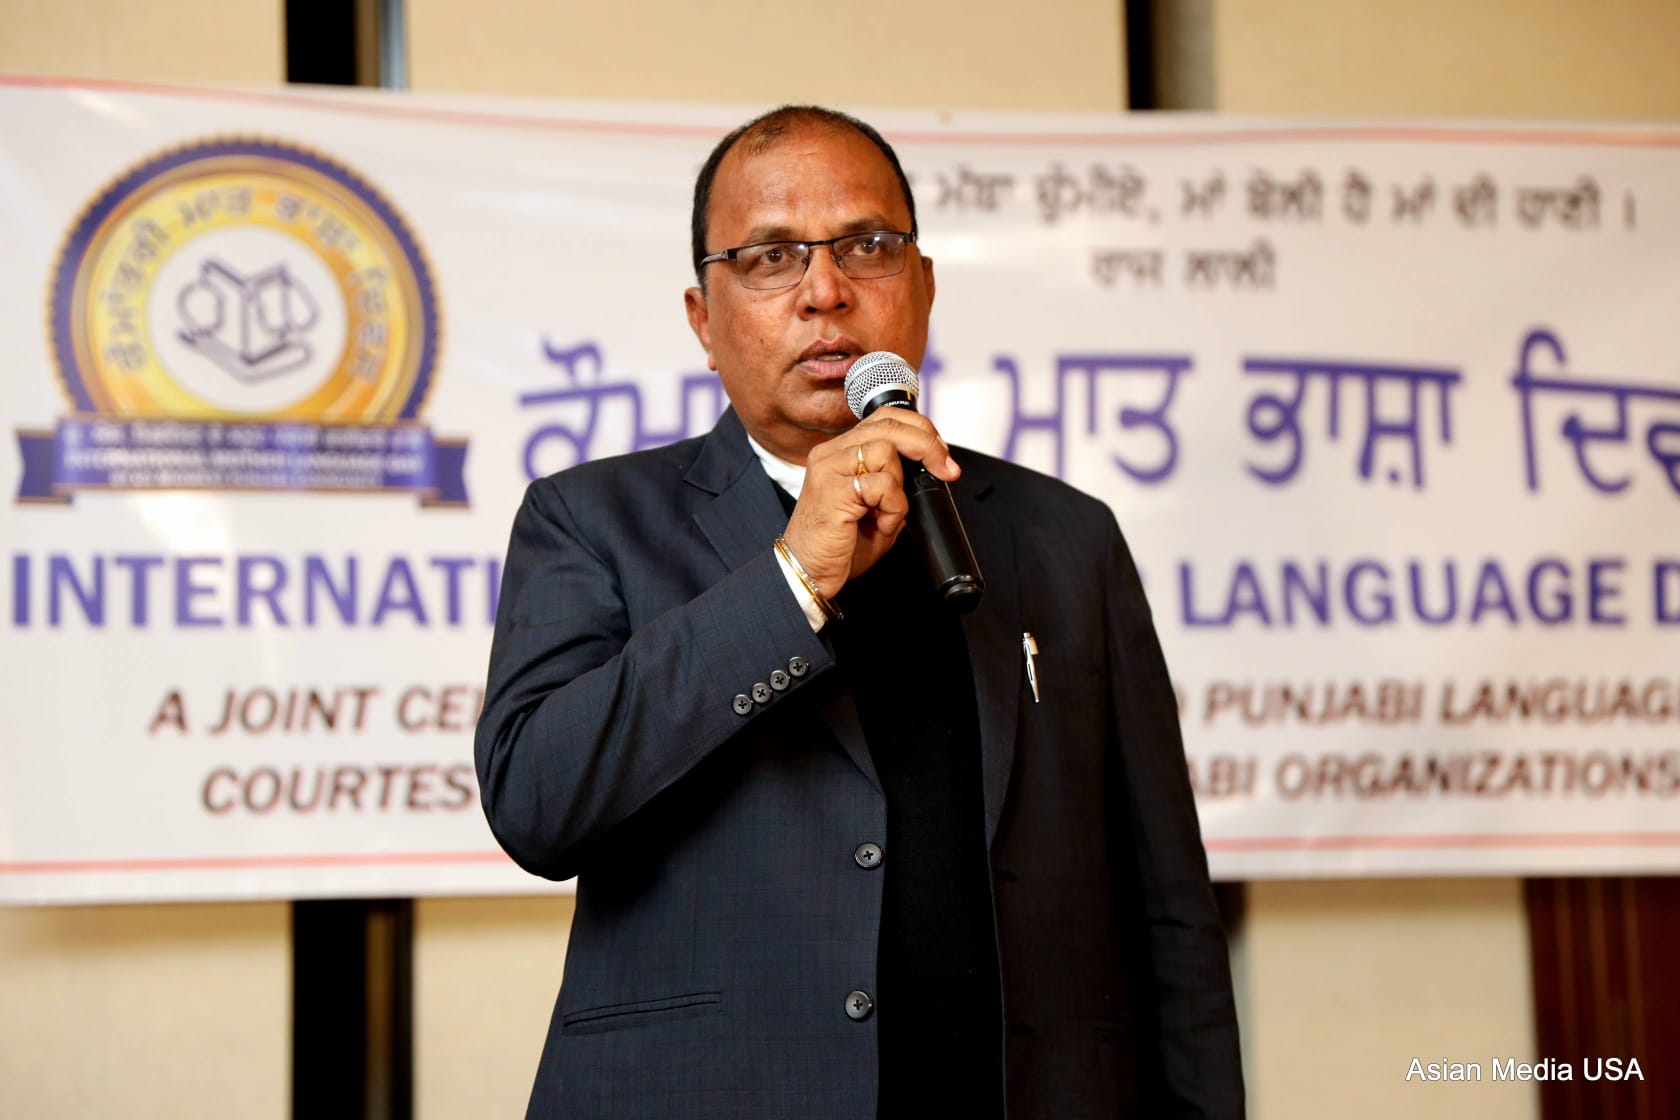  Azadi ka Amrit Mahotsav, Indian Punjabi organisations across the US Midwest in association with the Consulate General of India organised a vibrant cultural event to commemorate the International Mother Language Day on 27 February 2022 in Chicago.